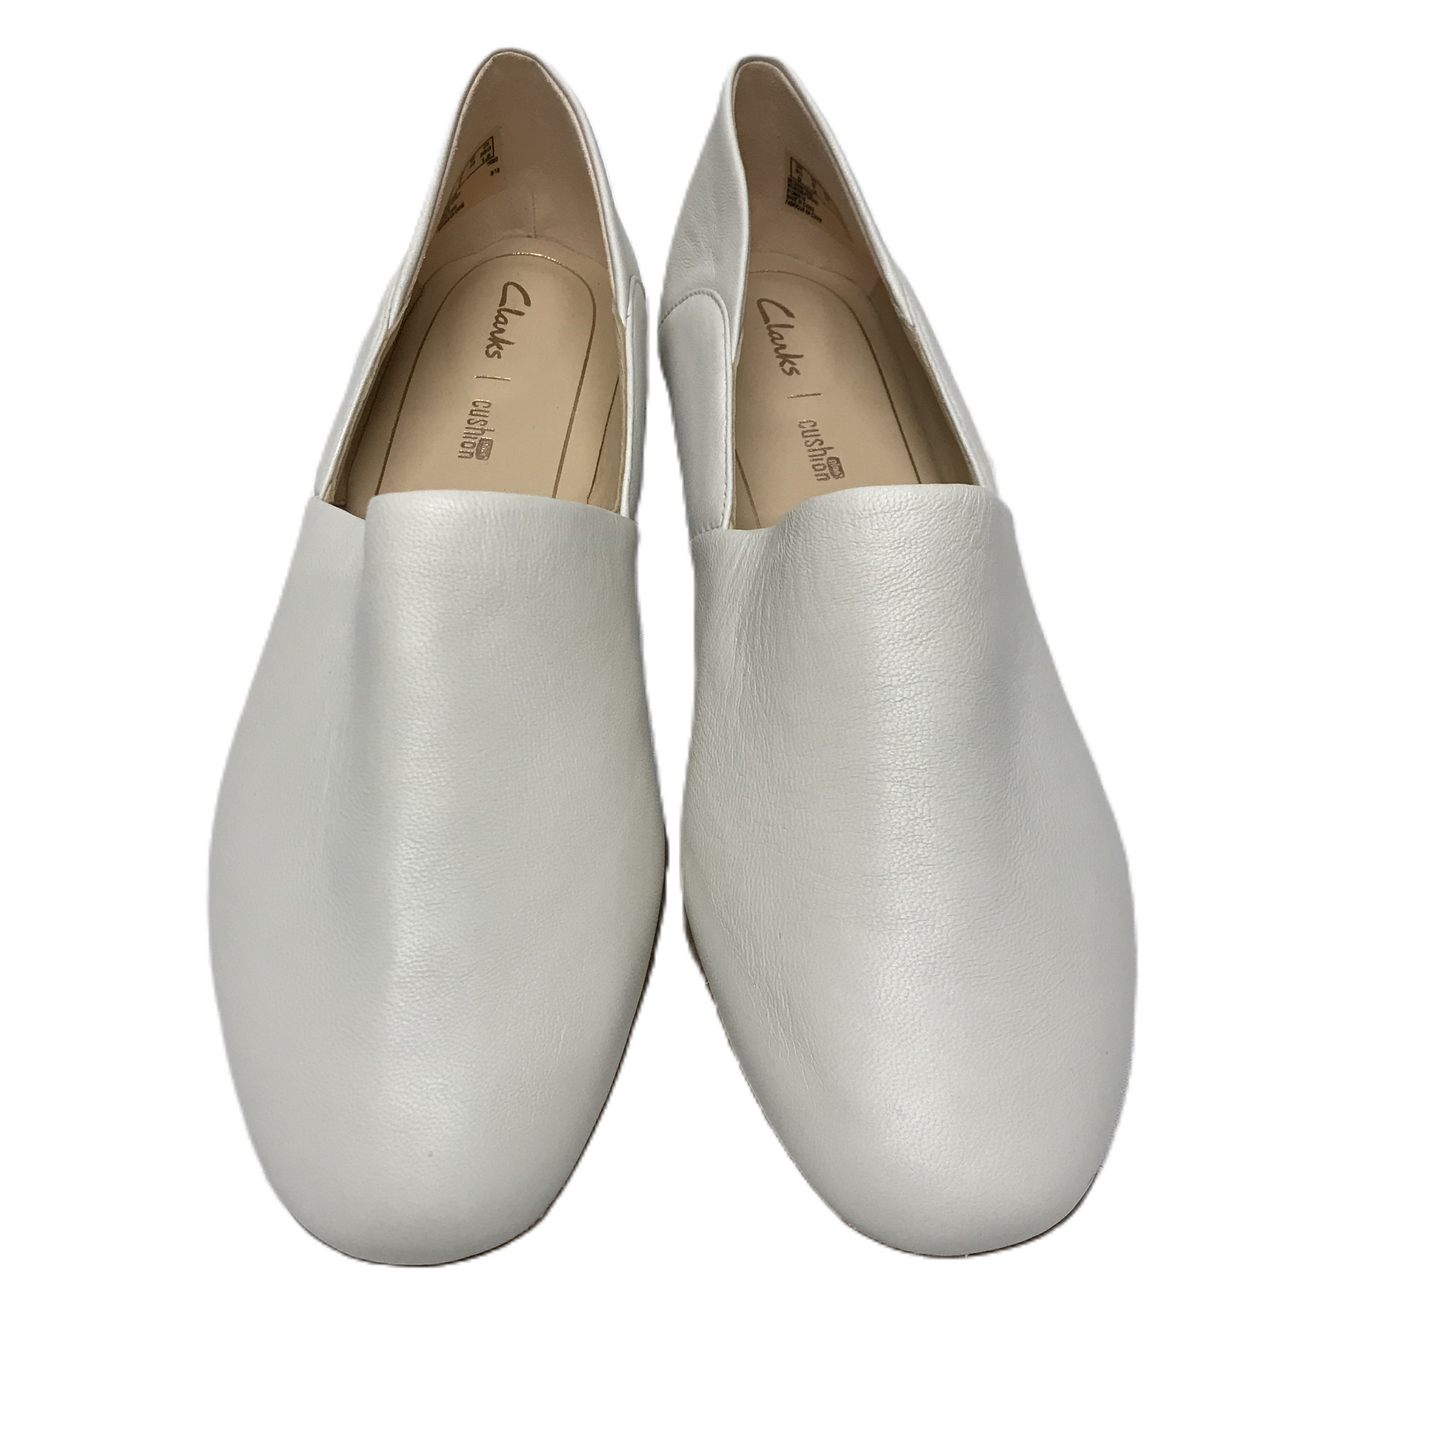 Cream Shoes Flats By Clarks, Size: 9